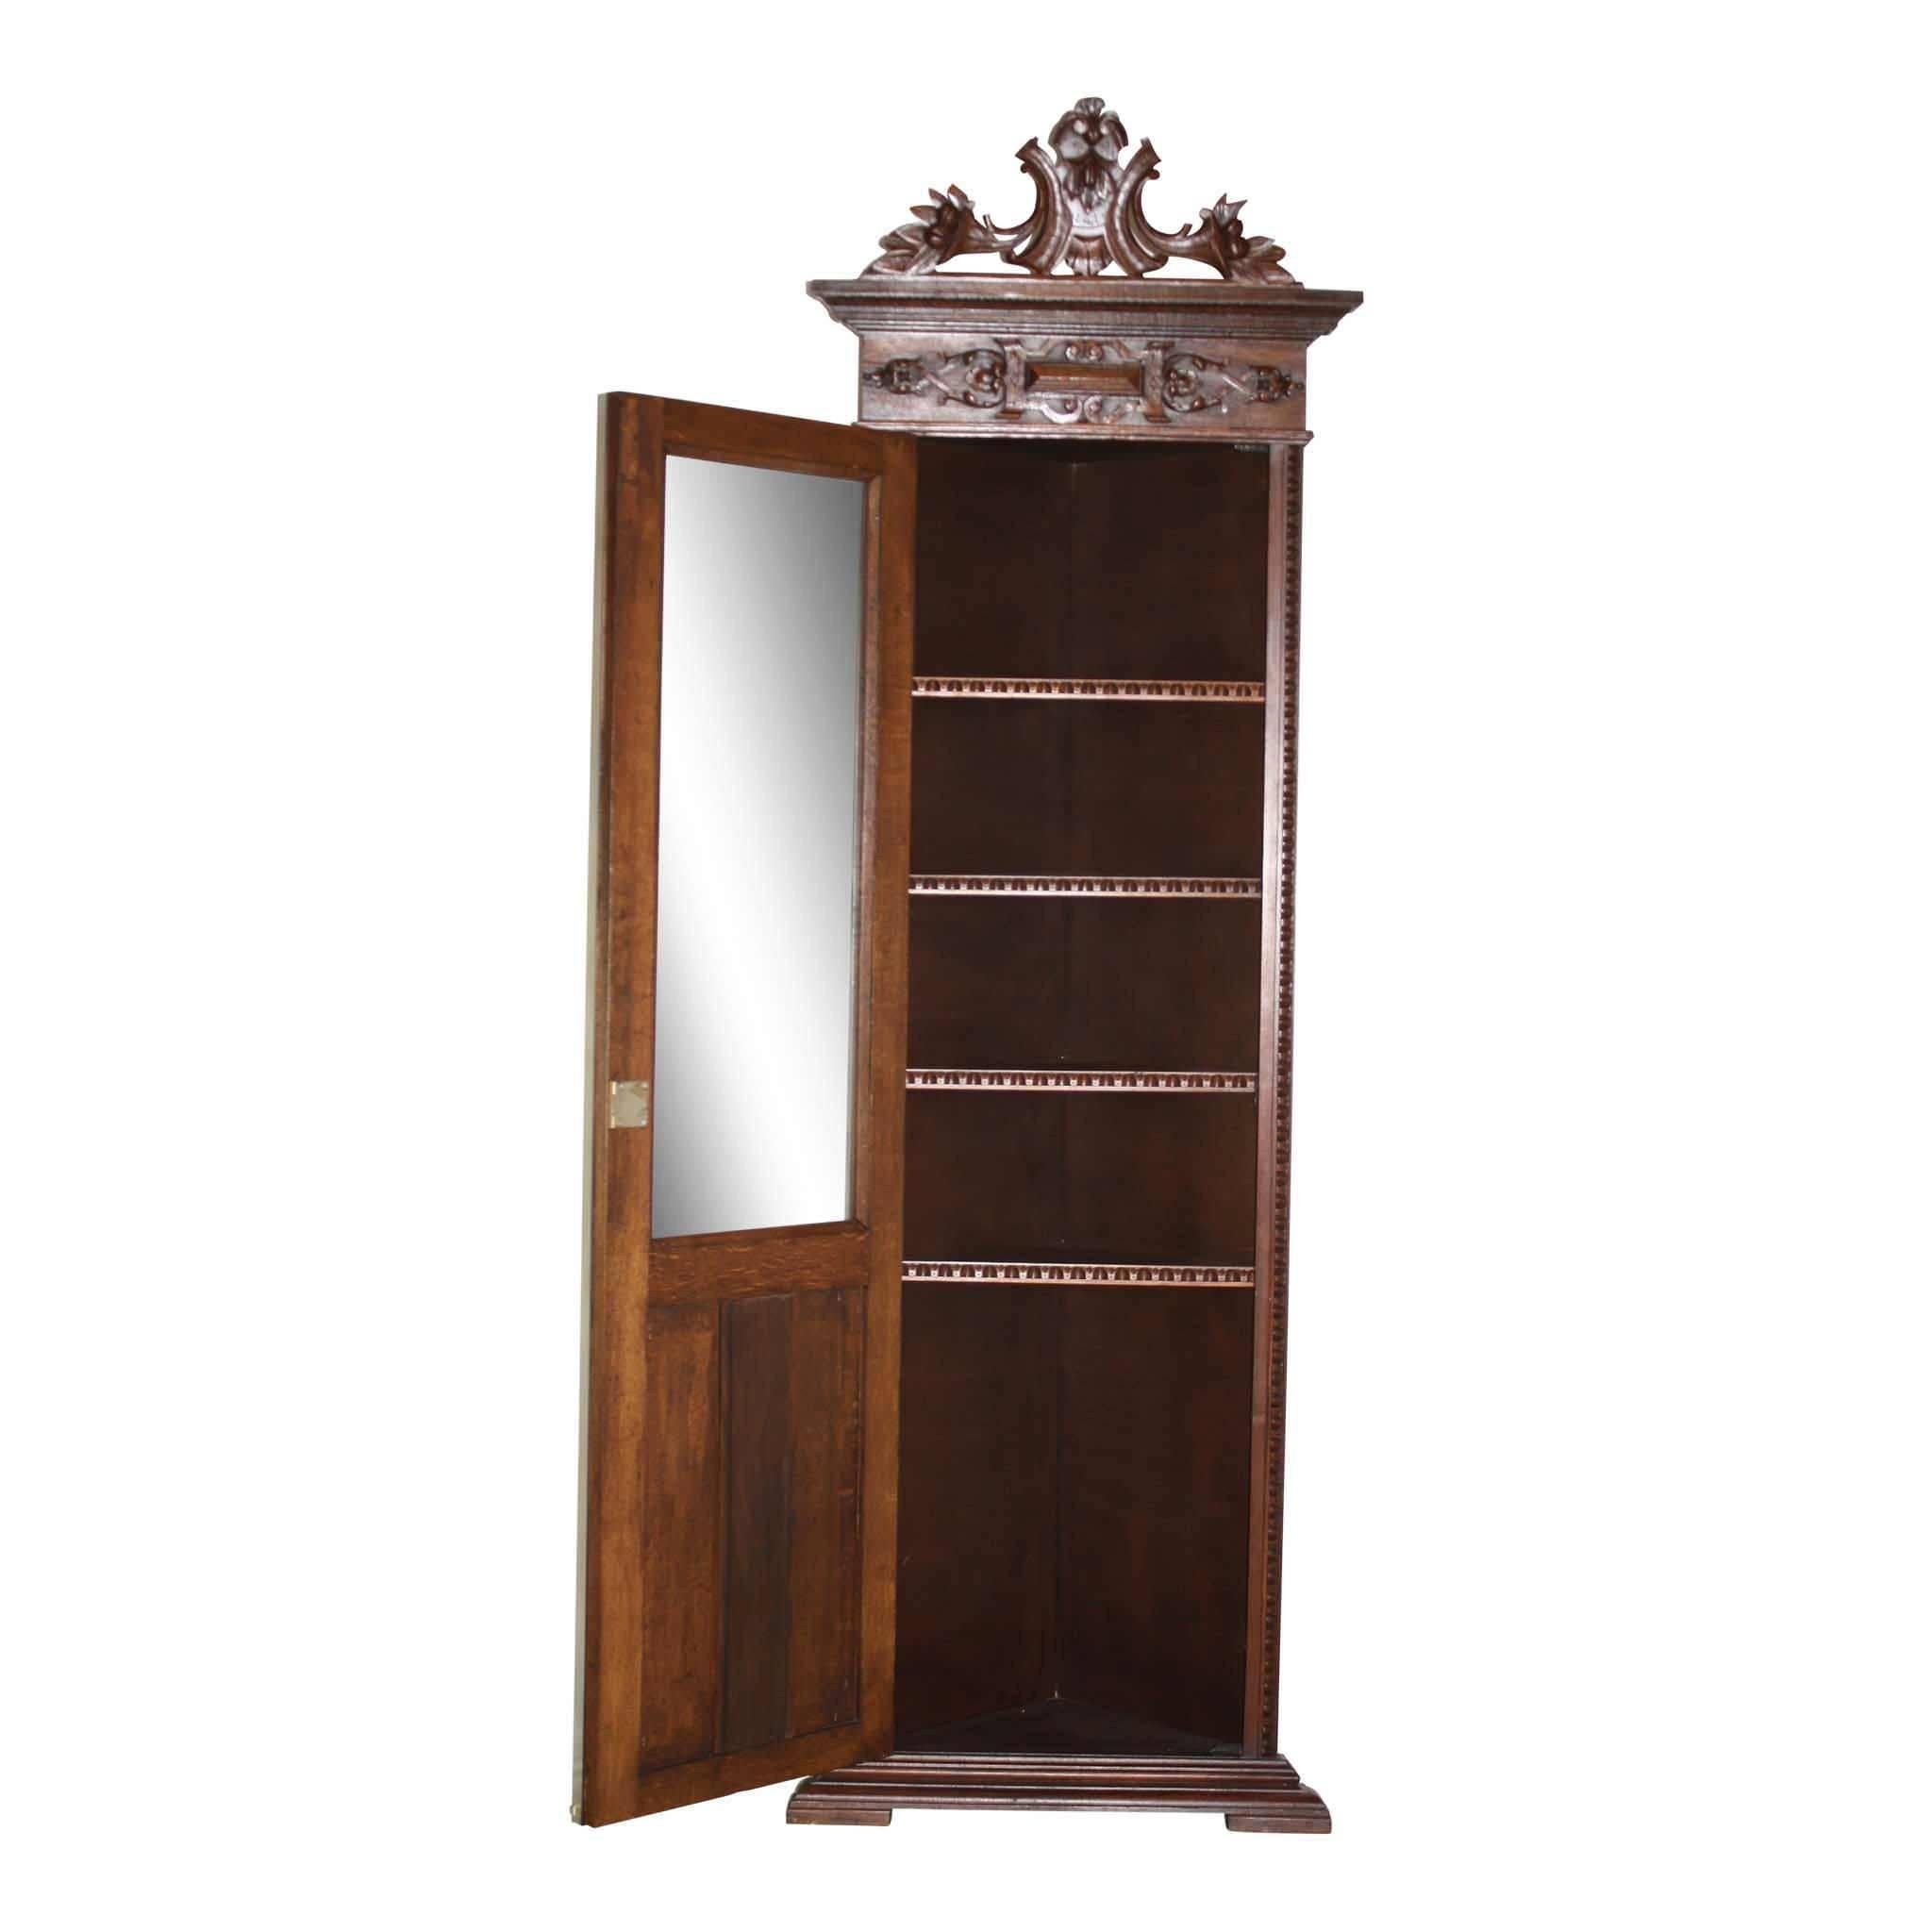 A distinct feature of this elegant corner cabinet is the grouse carved among grasses on the lower door. The crown of the cabinet displays ornate carvings with opposing lilies. The cabinet has matching trim on the sides and four shelves. Thin, yet